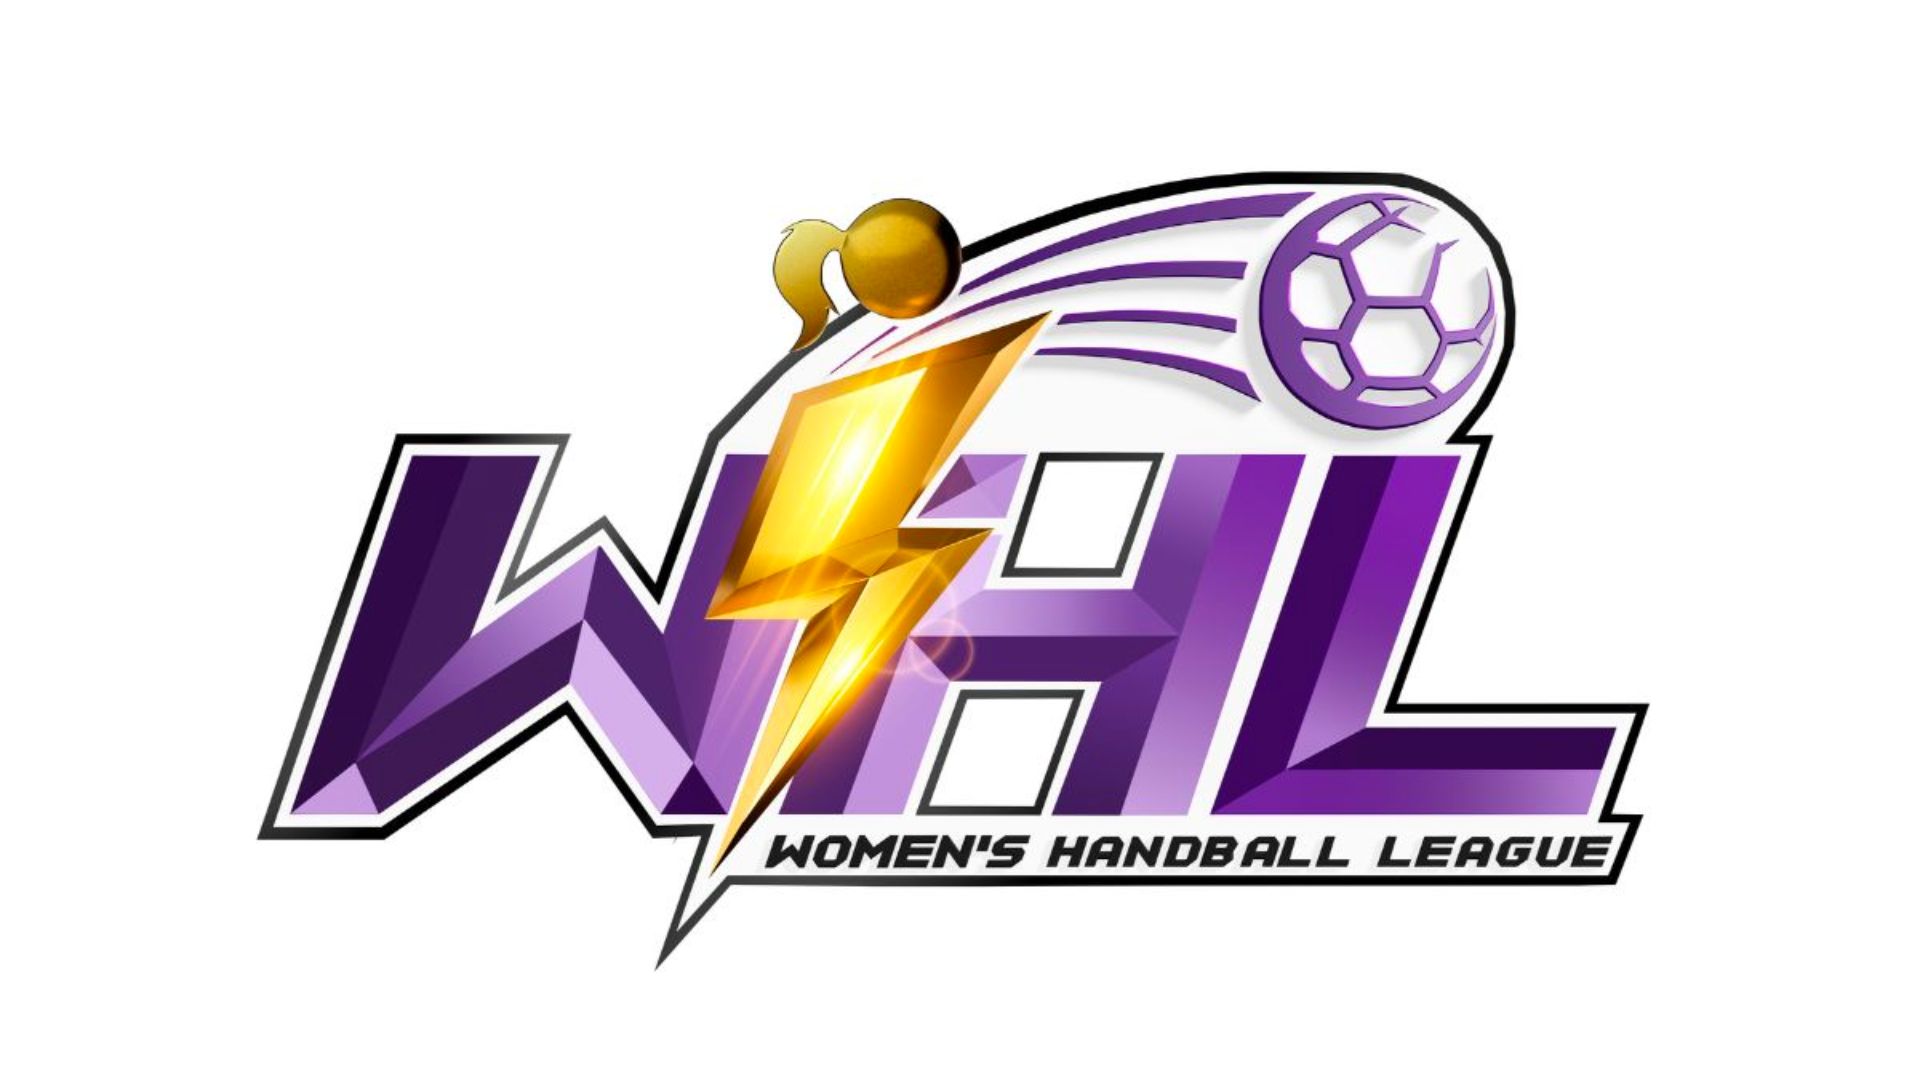 South Asia's Inaugural Professional Women’s Handball League Debuts in India with Pavna Sports Venture Launch